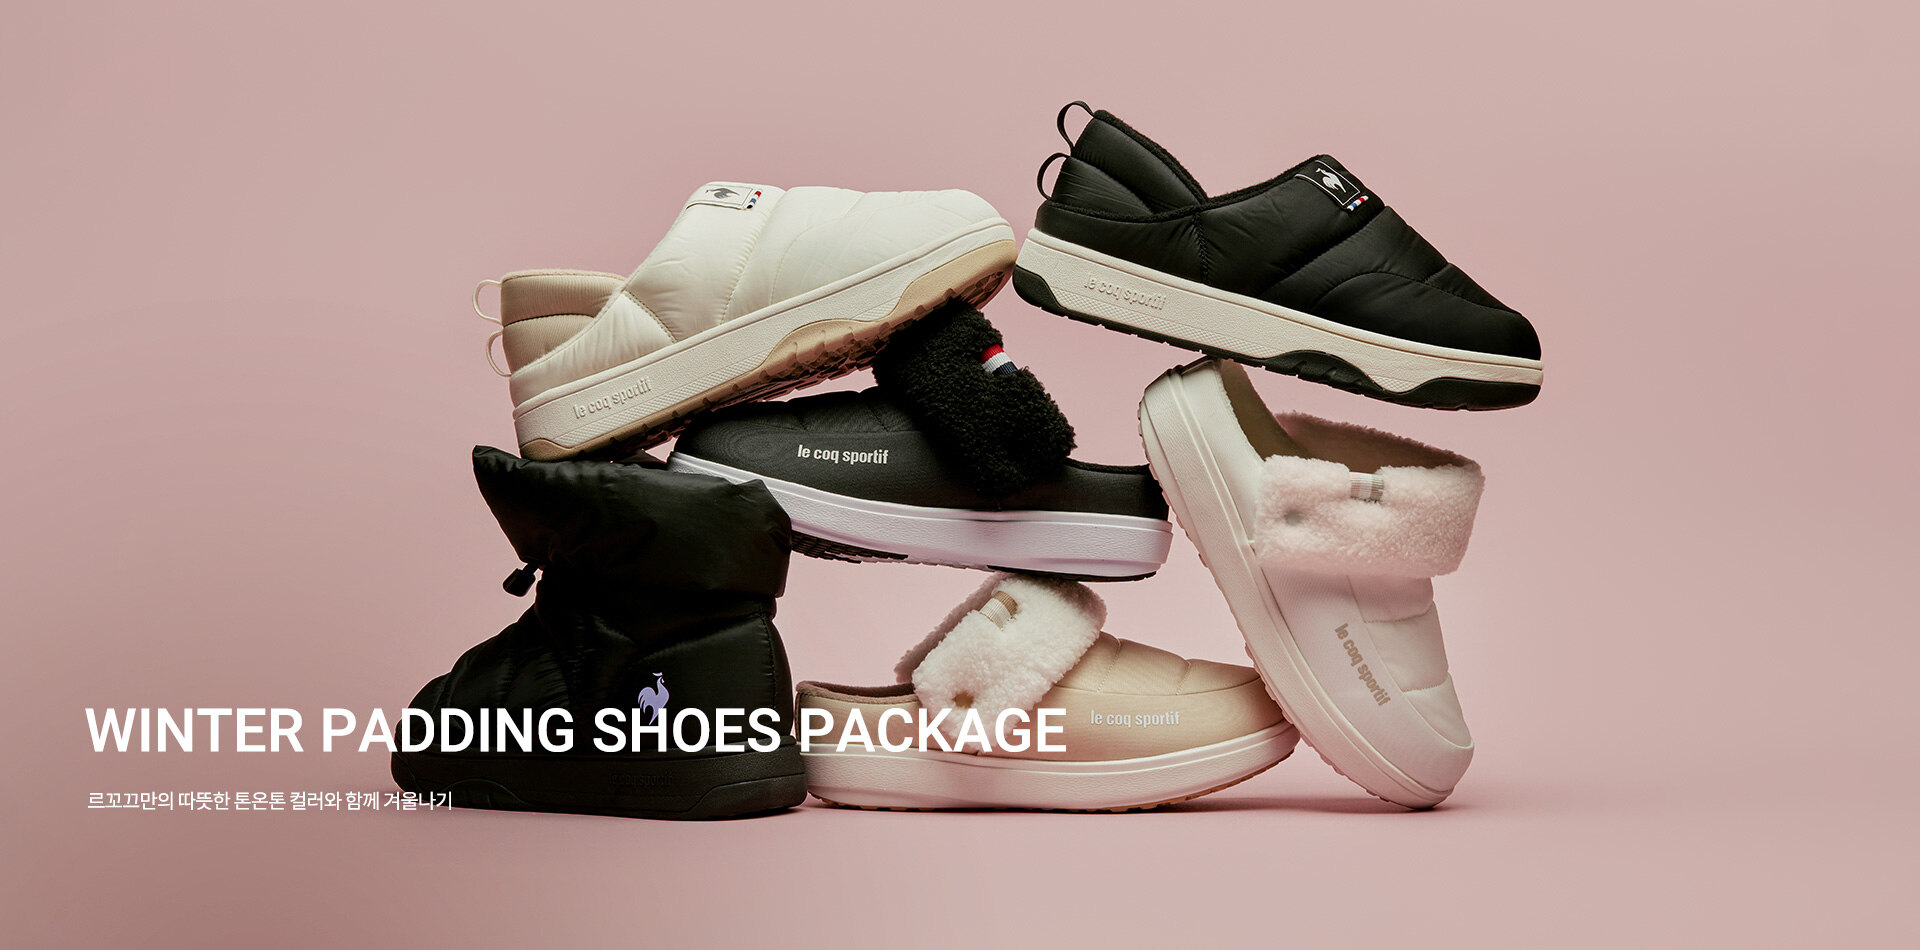 WINTER PADDING SHOES PACKAGE